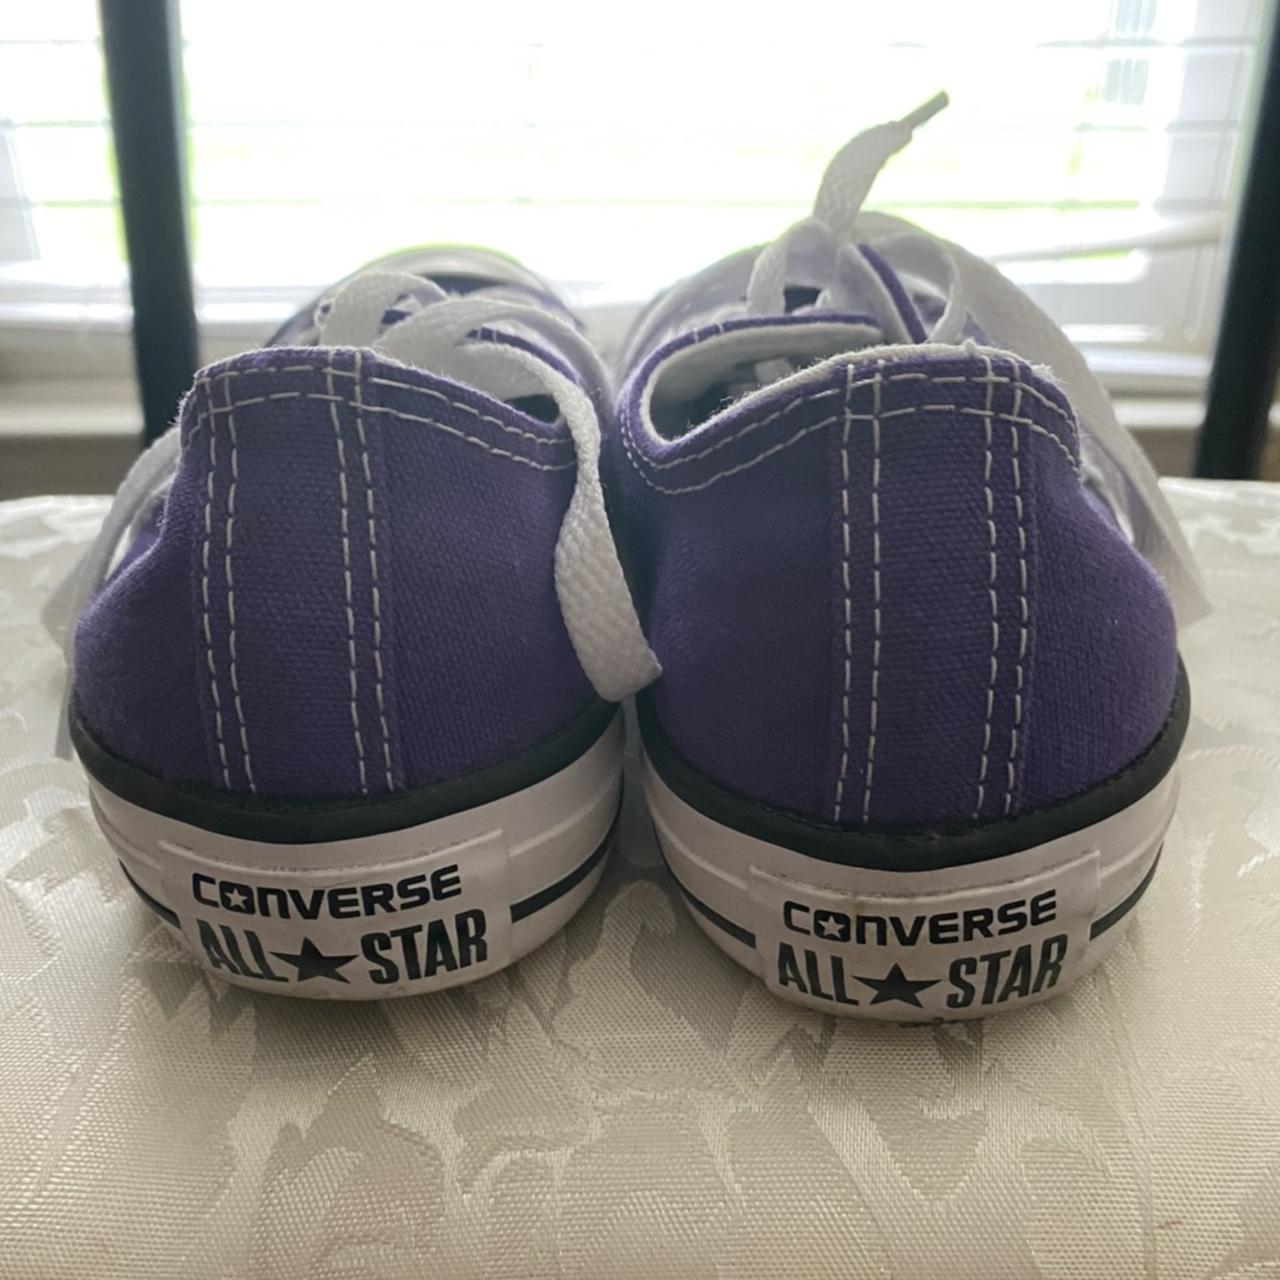 Product Image 1 - Purple Converse!!! Omg these are